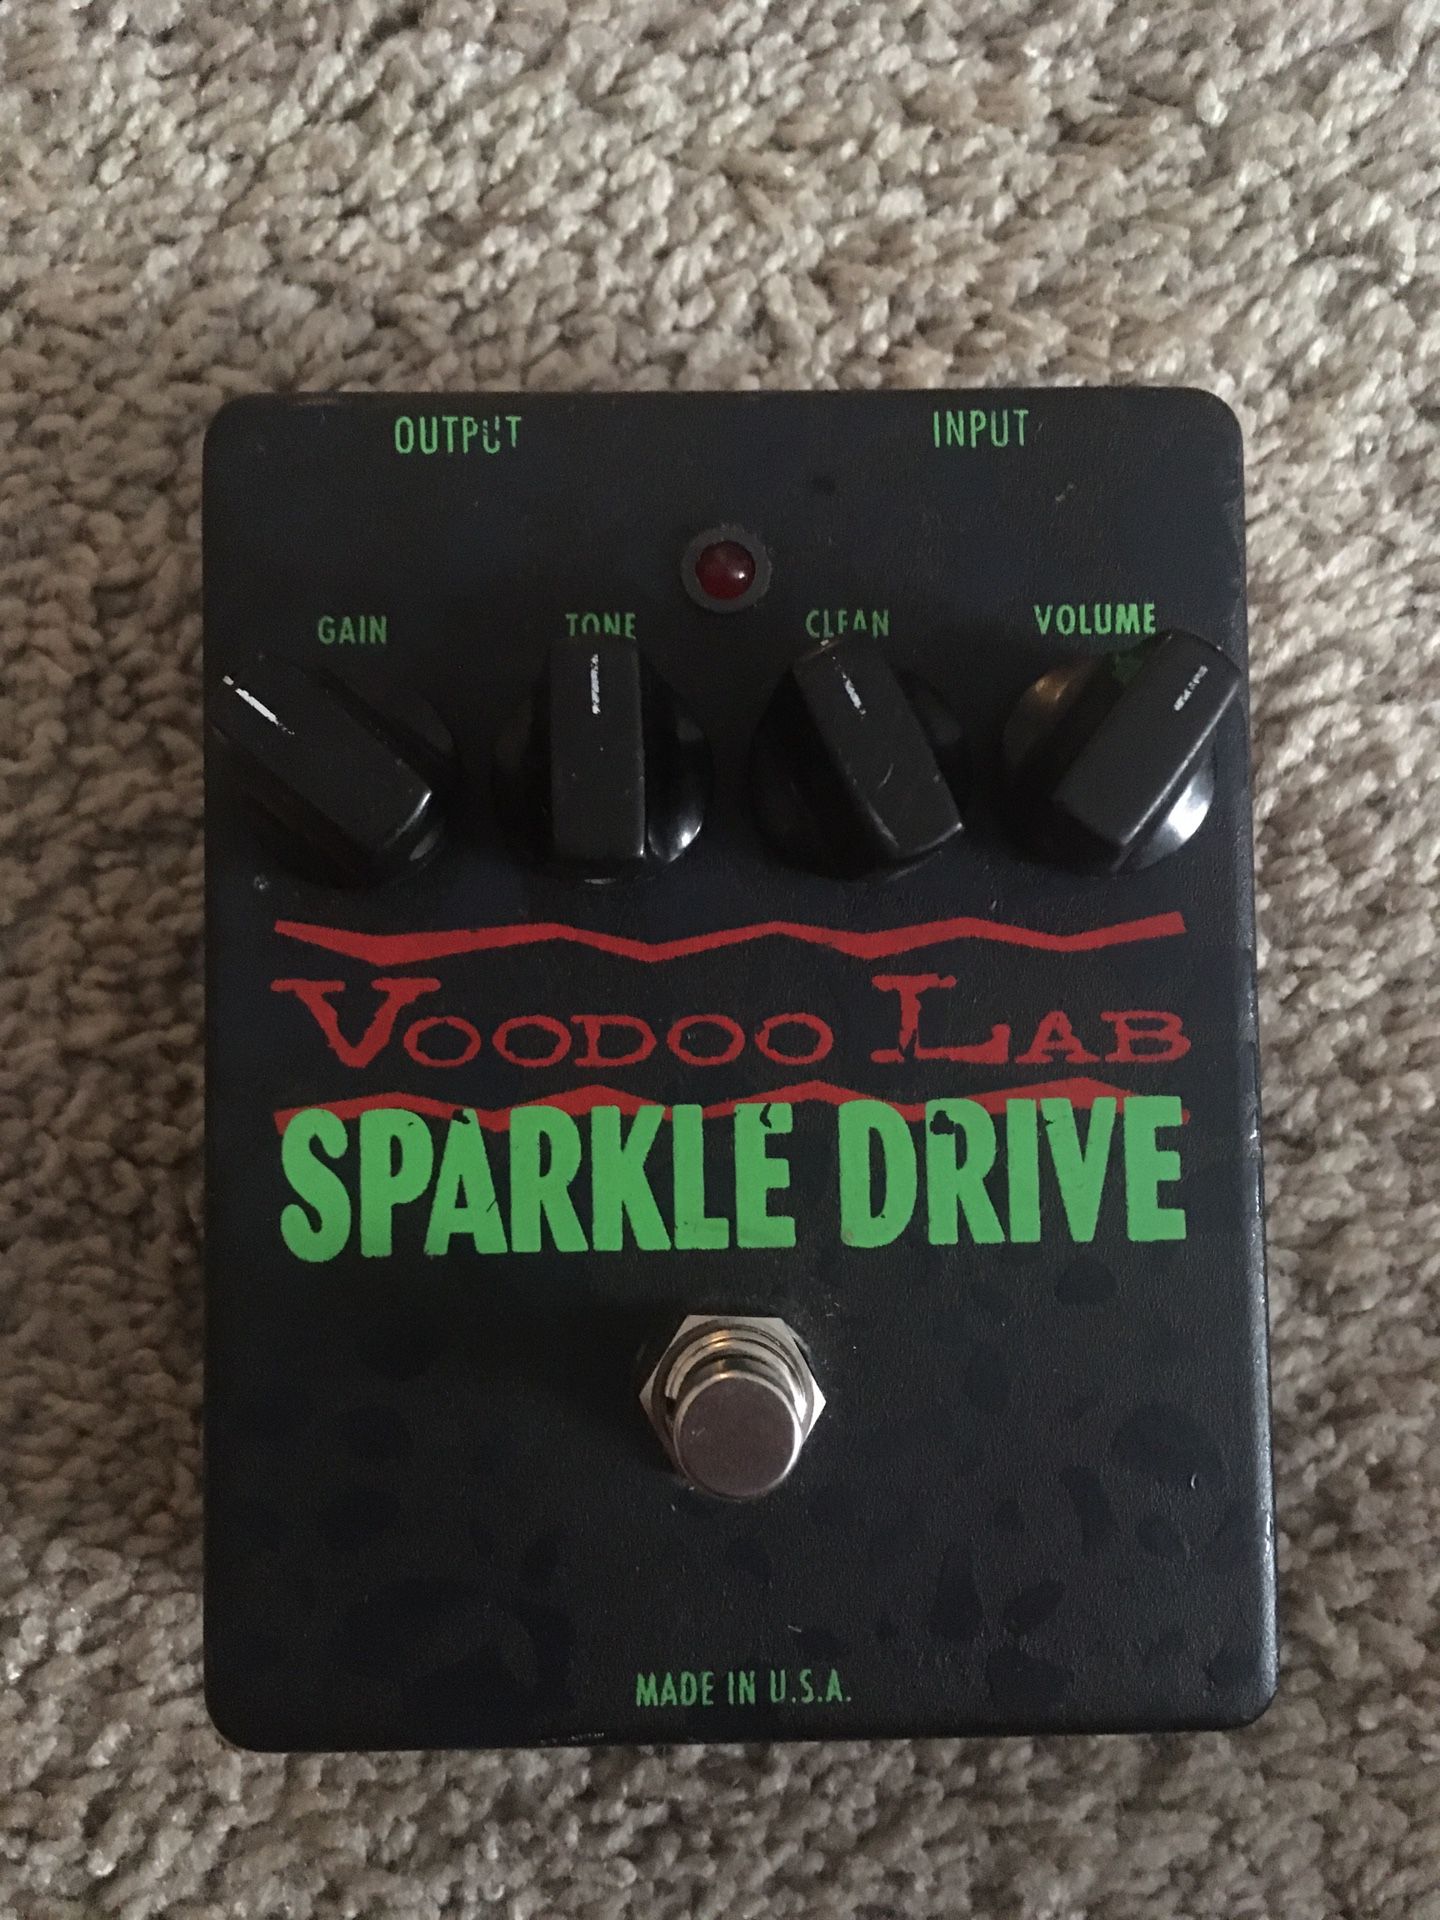 Voodoo Lab Sparkle Drive Guitar Overdrive Pedal